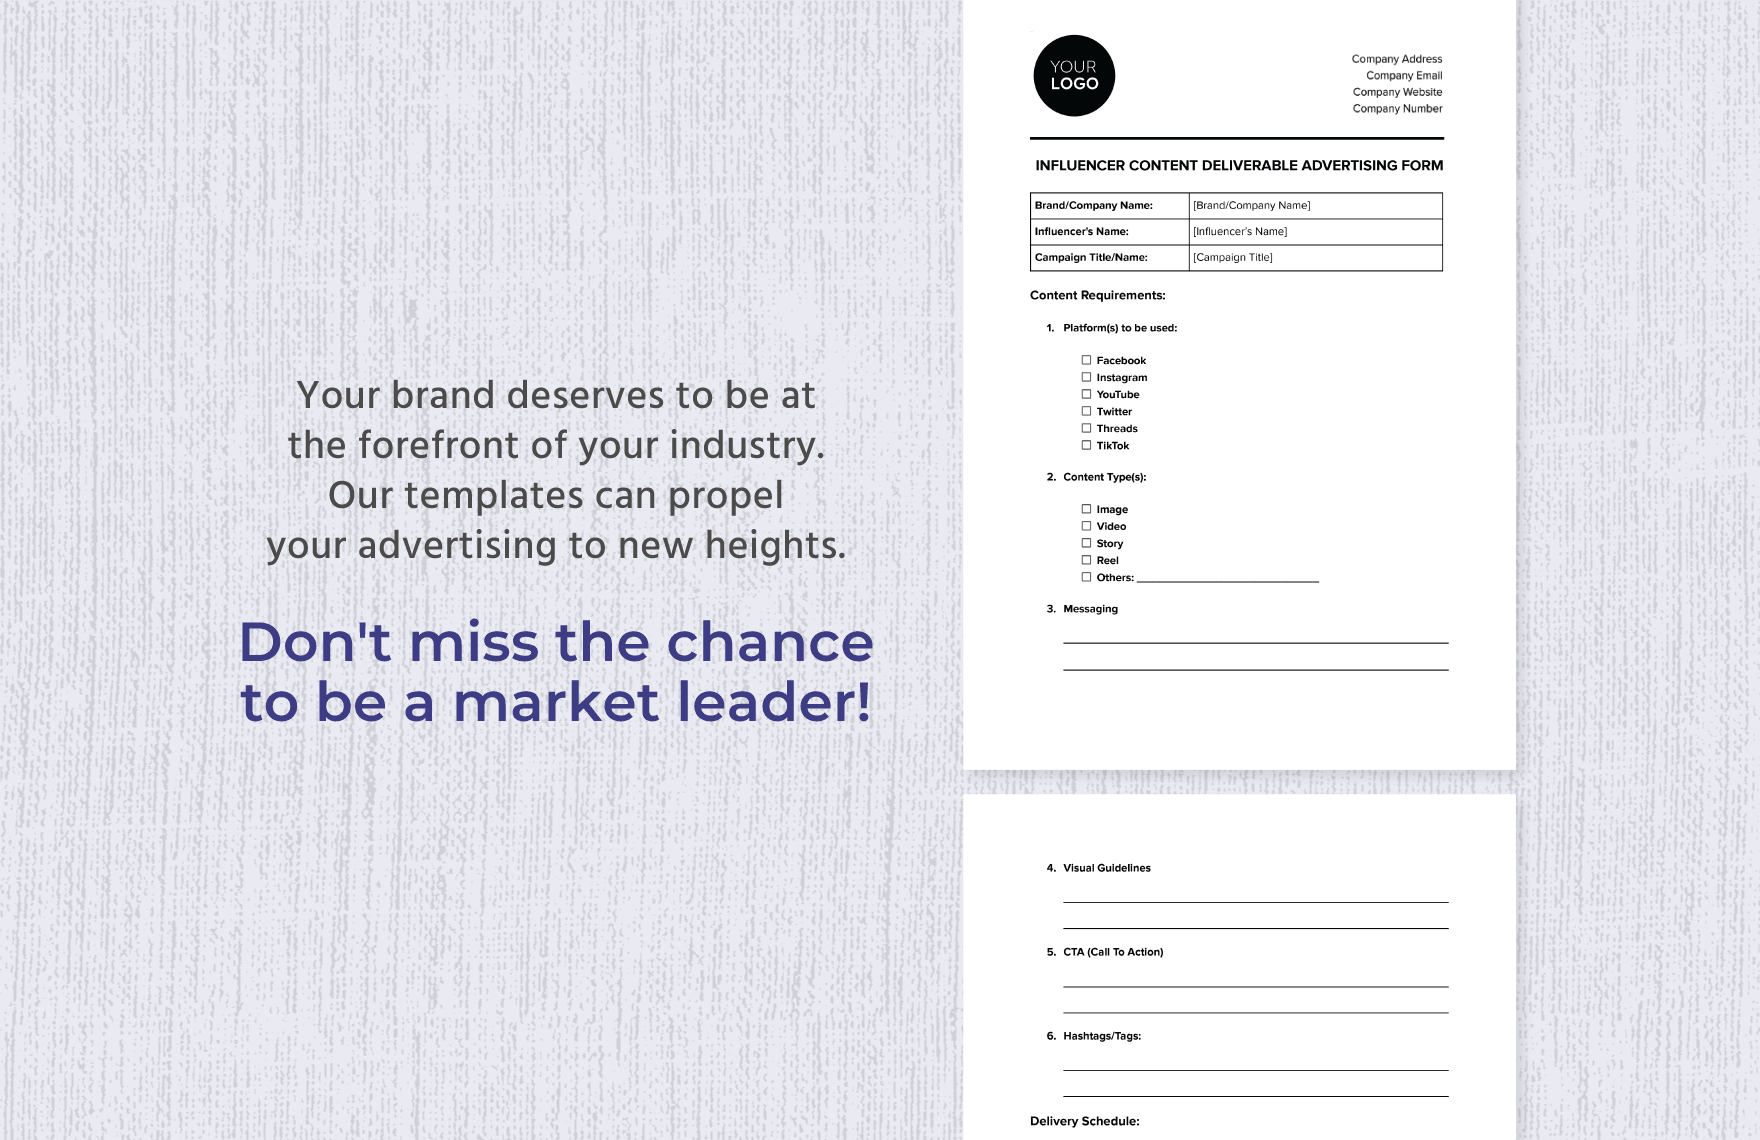 Influencer Content Deliverable Advertising Form Template